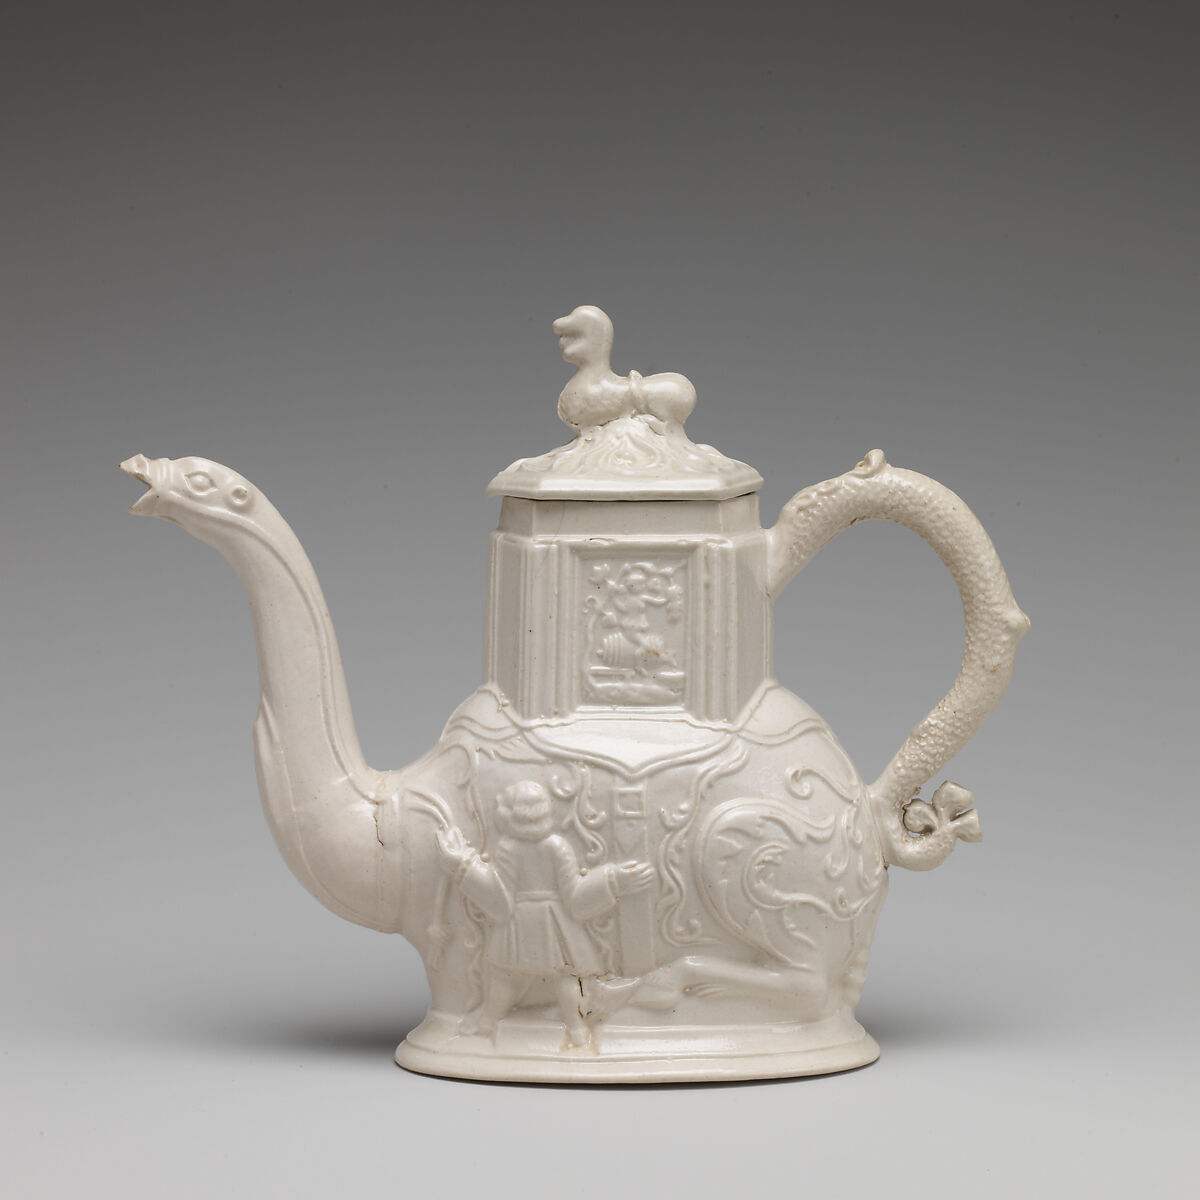 Teapot in the form of a camel, Salt-glazed stoneware, British, Staffordshire 